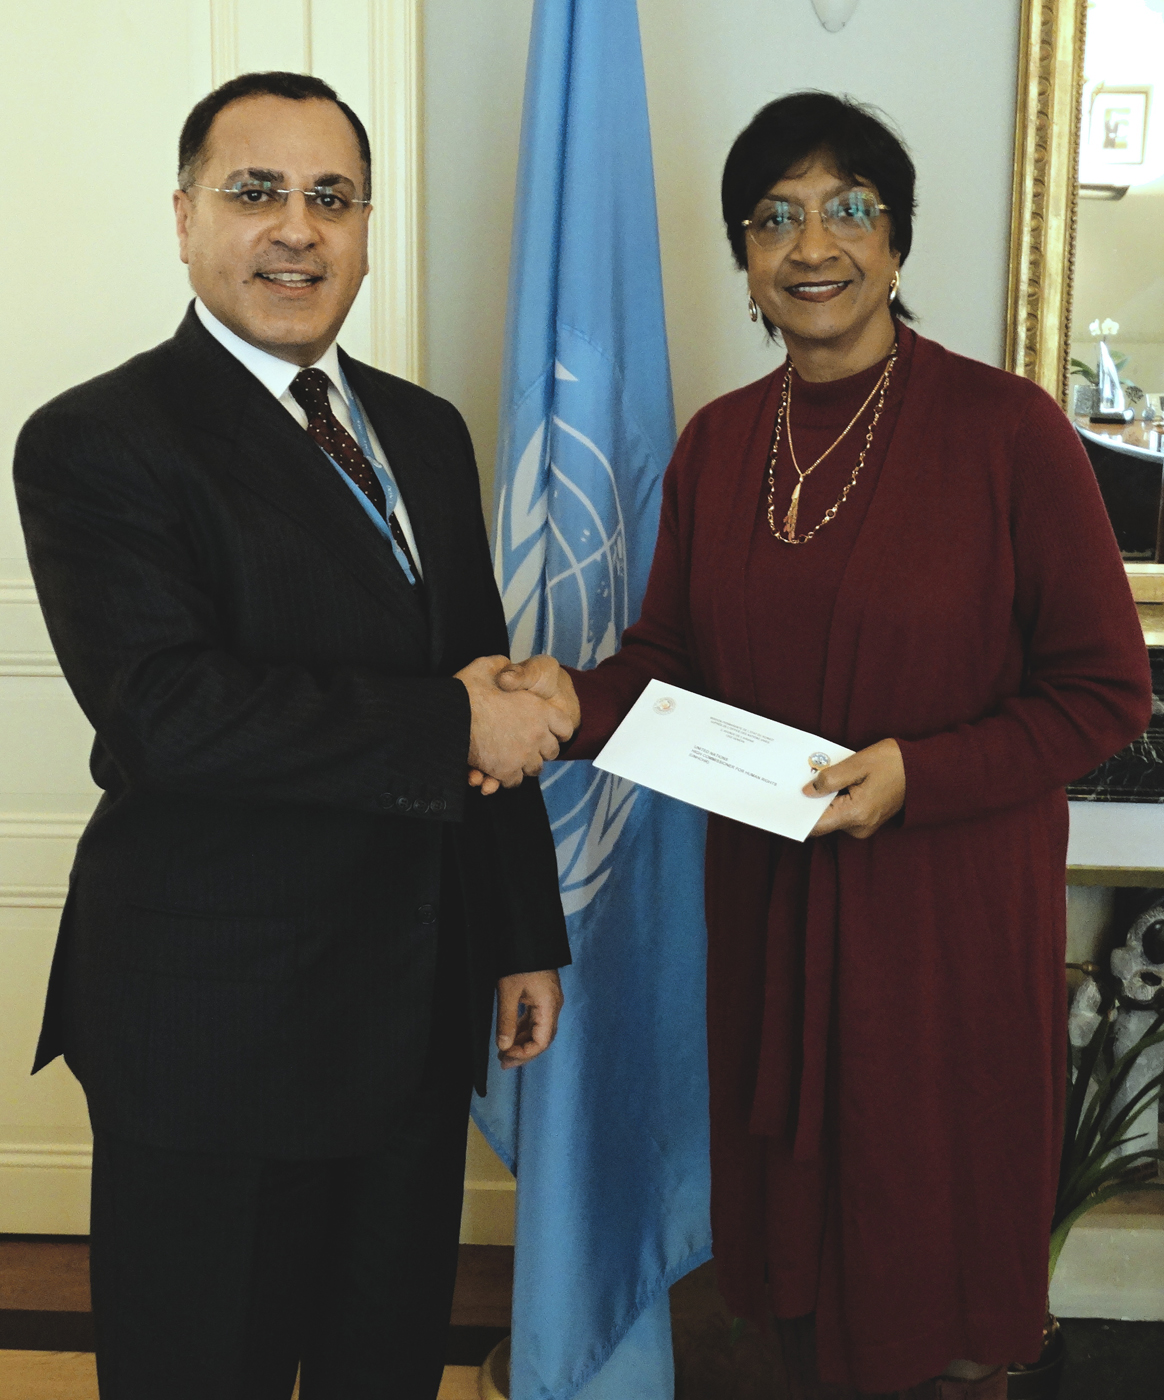 UN High Commissioner for Human Rights Navi Pillay with Kuwaiti delegation to the UN office in Geneva Jamal Al-Ghunaim